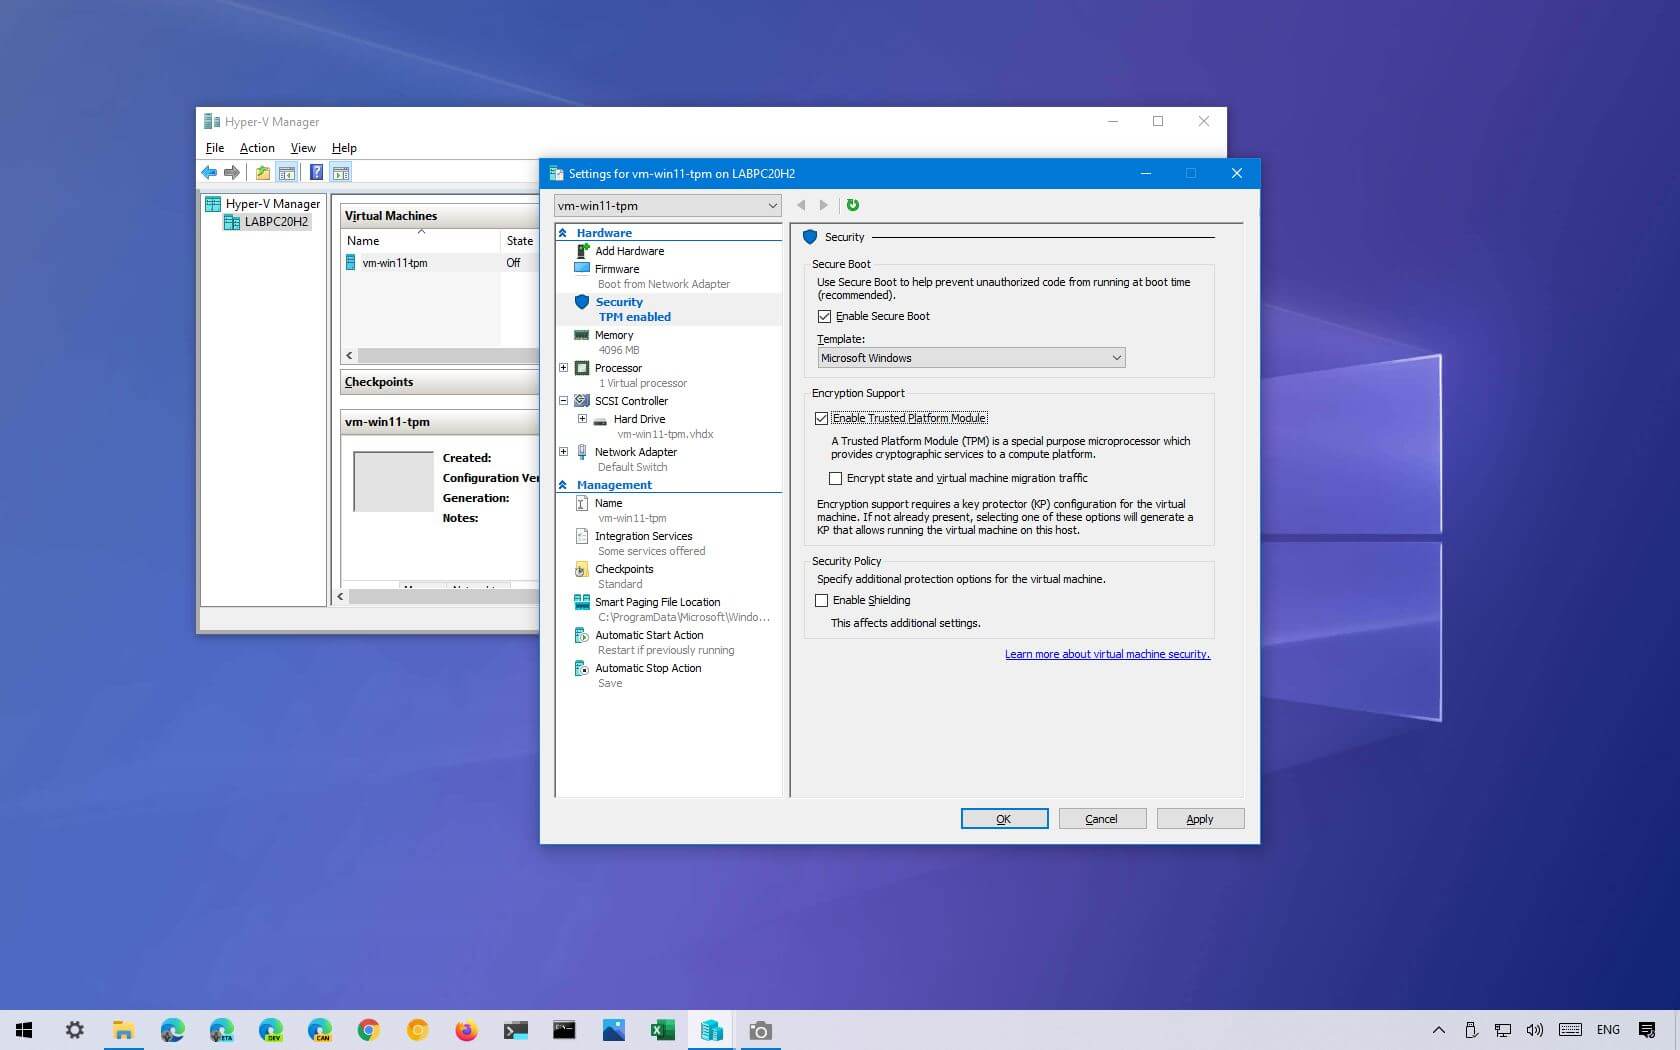 How to Install Windows 11: Enable TPM and Secure Boot